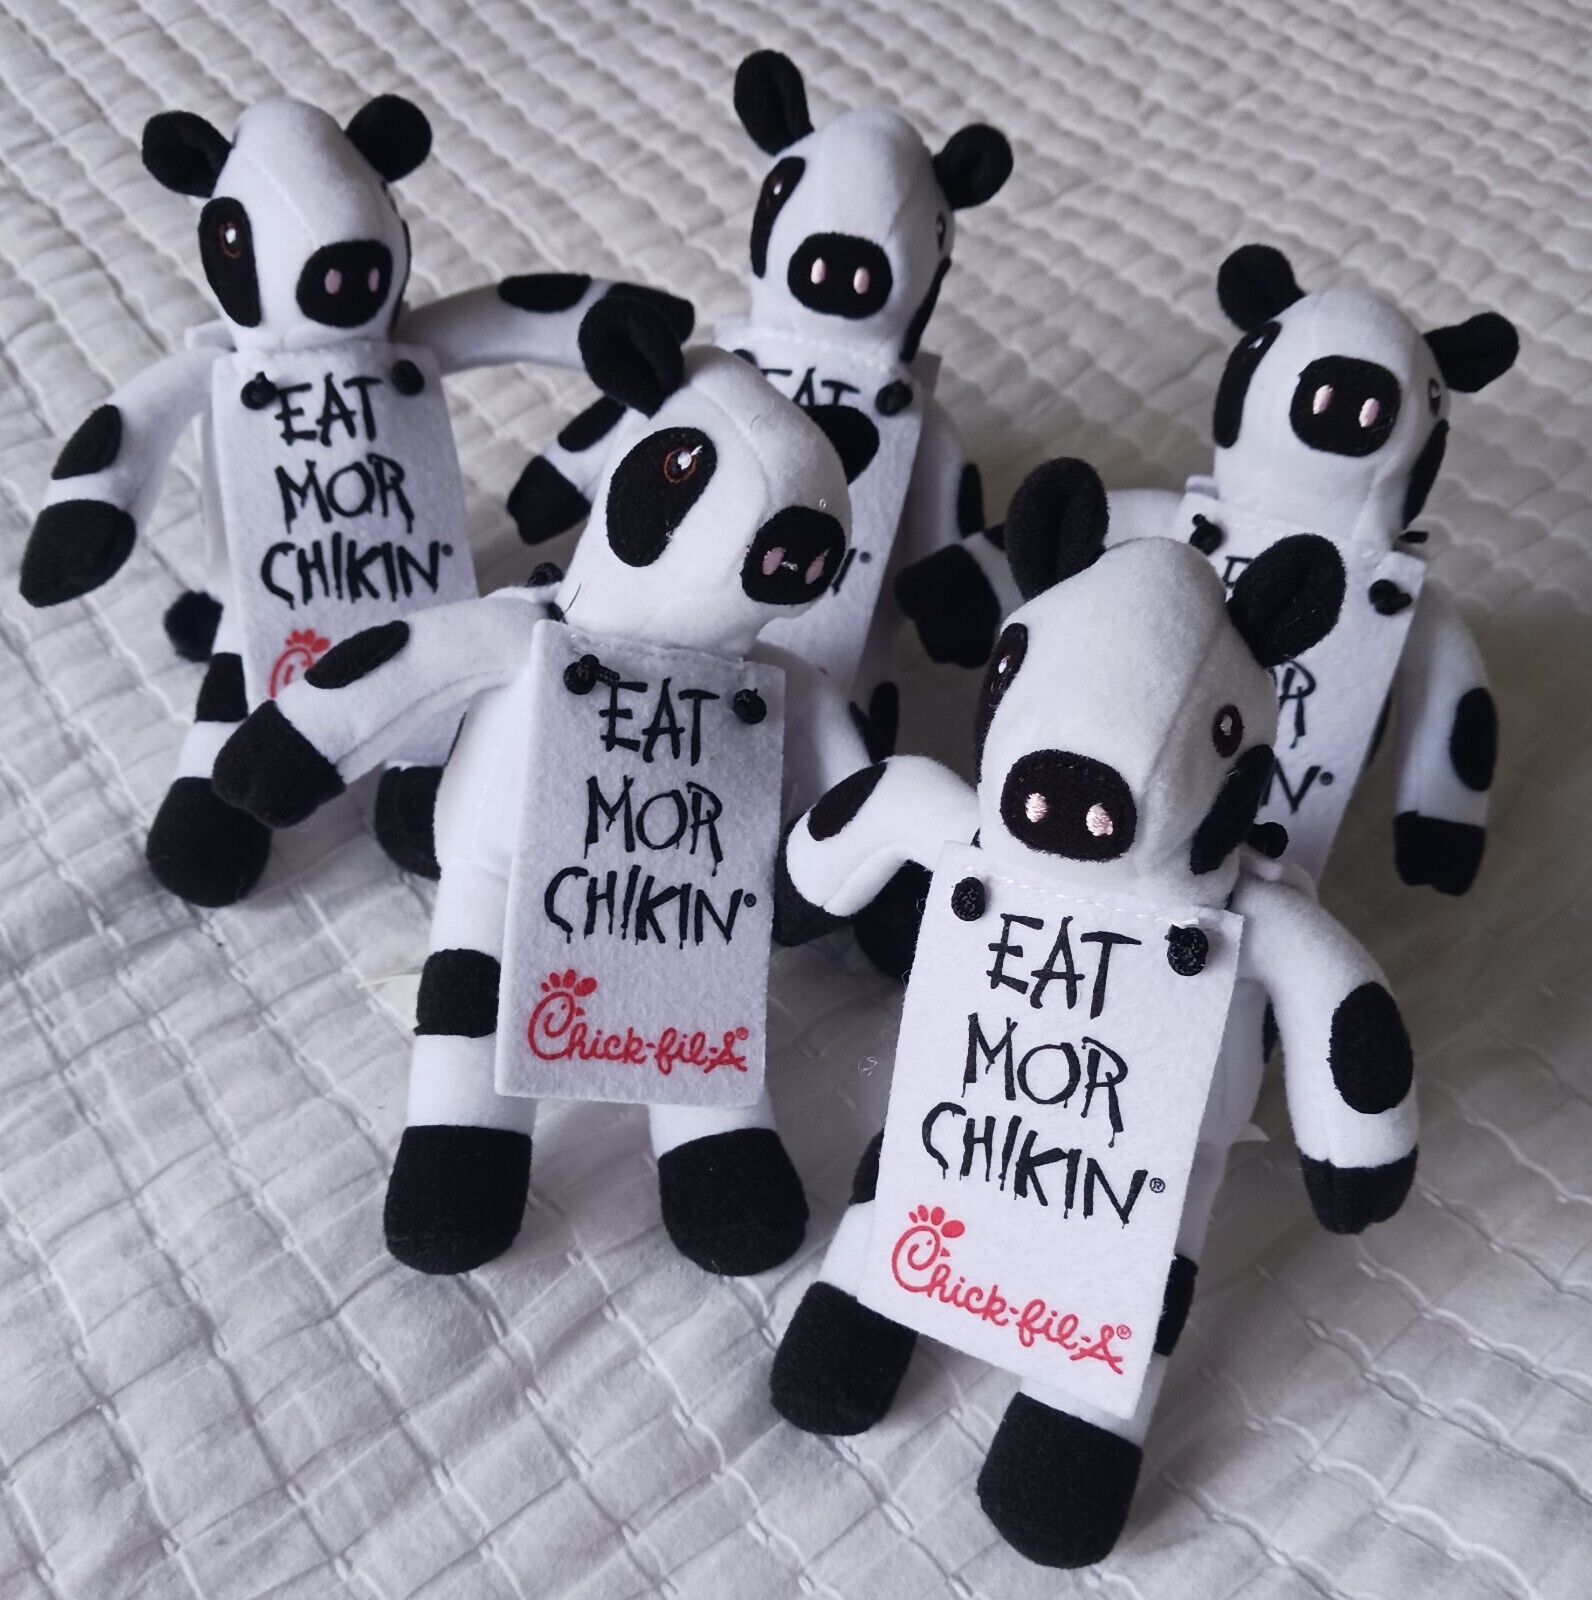 Chick-fil-A Cow Stuffed Plush Toy Eat Mor Chikin Approx. 6 Inch, LOT OF 5